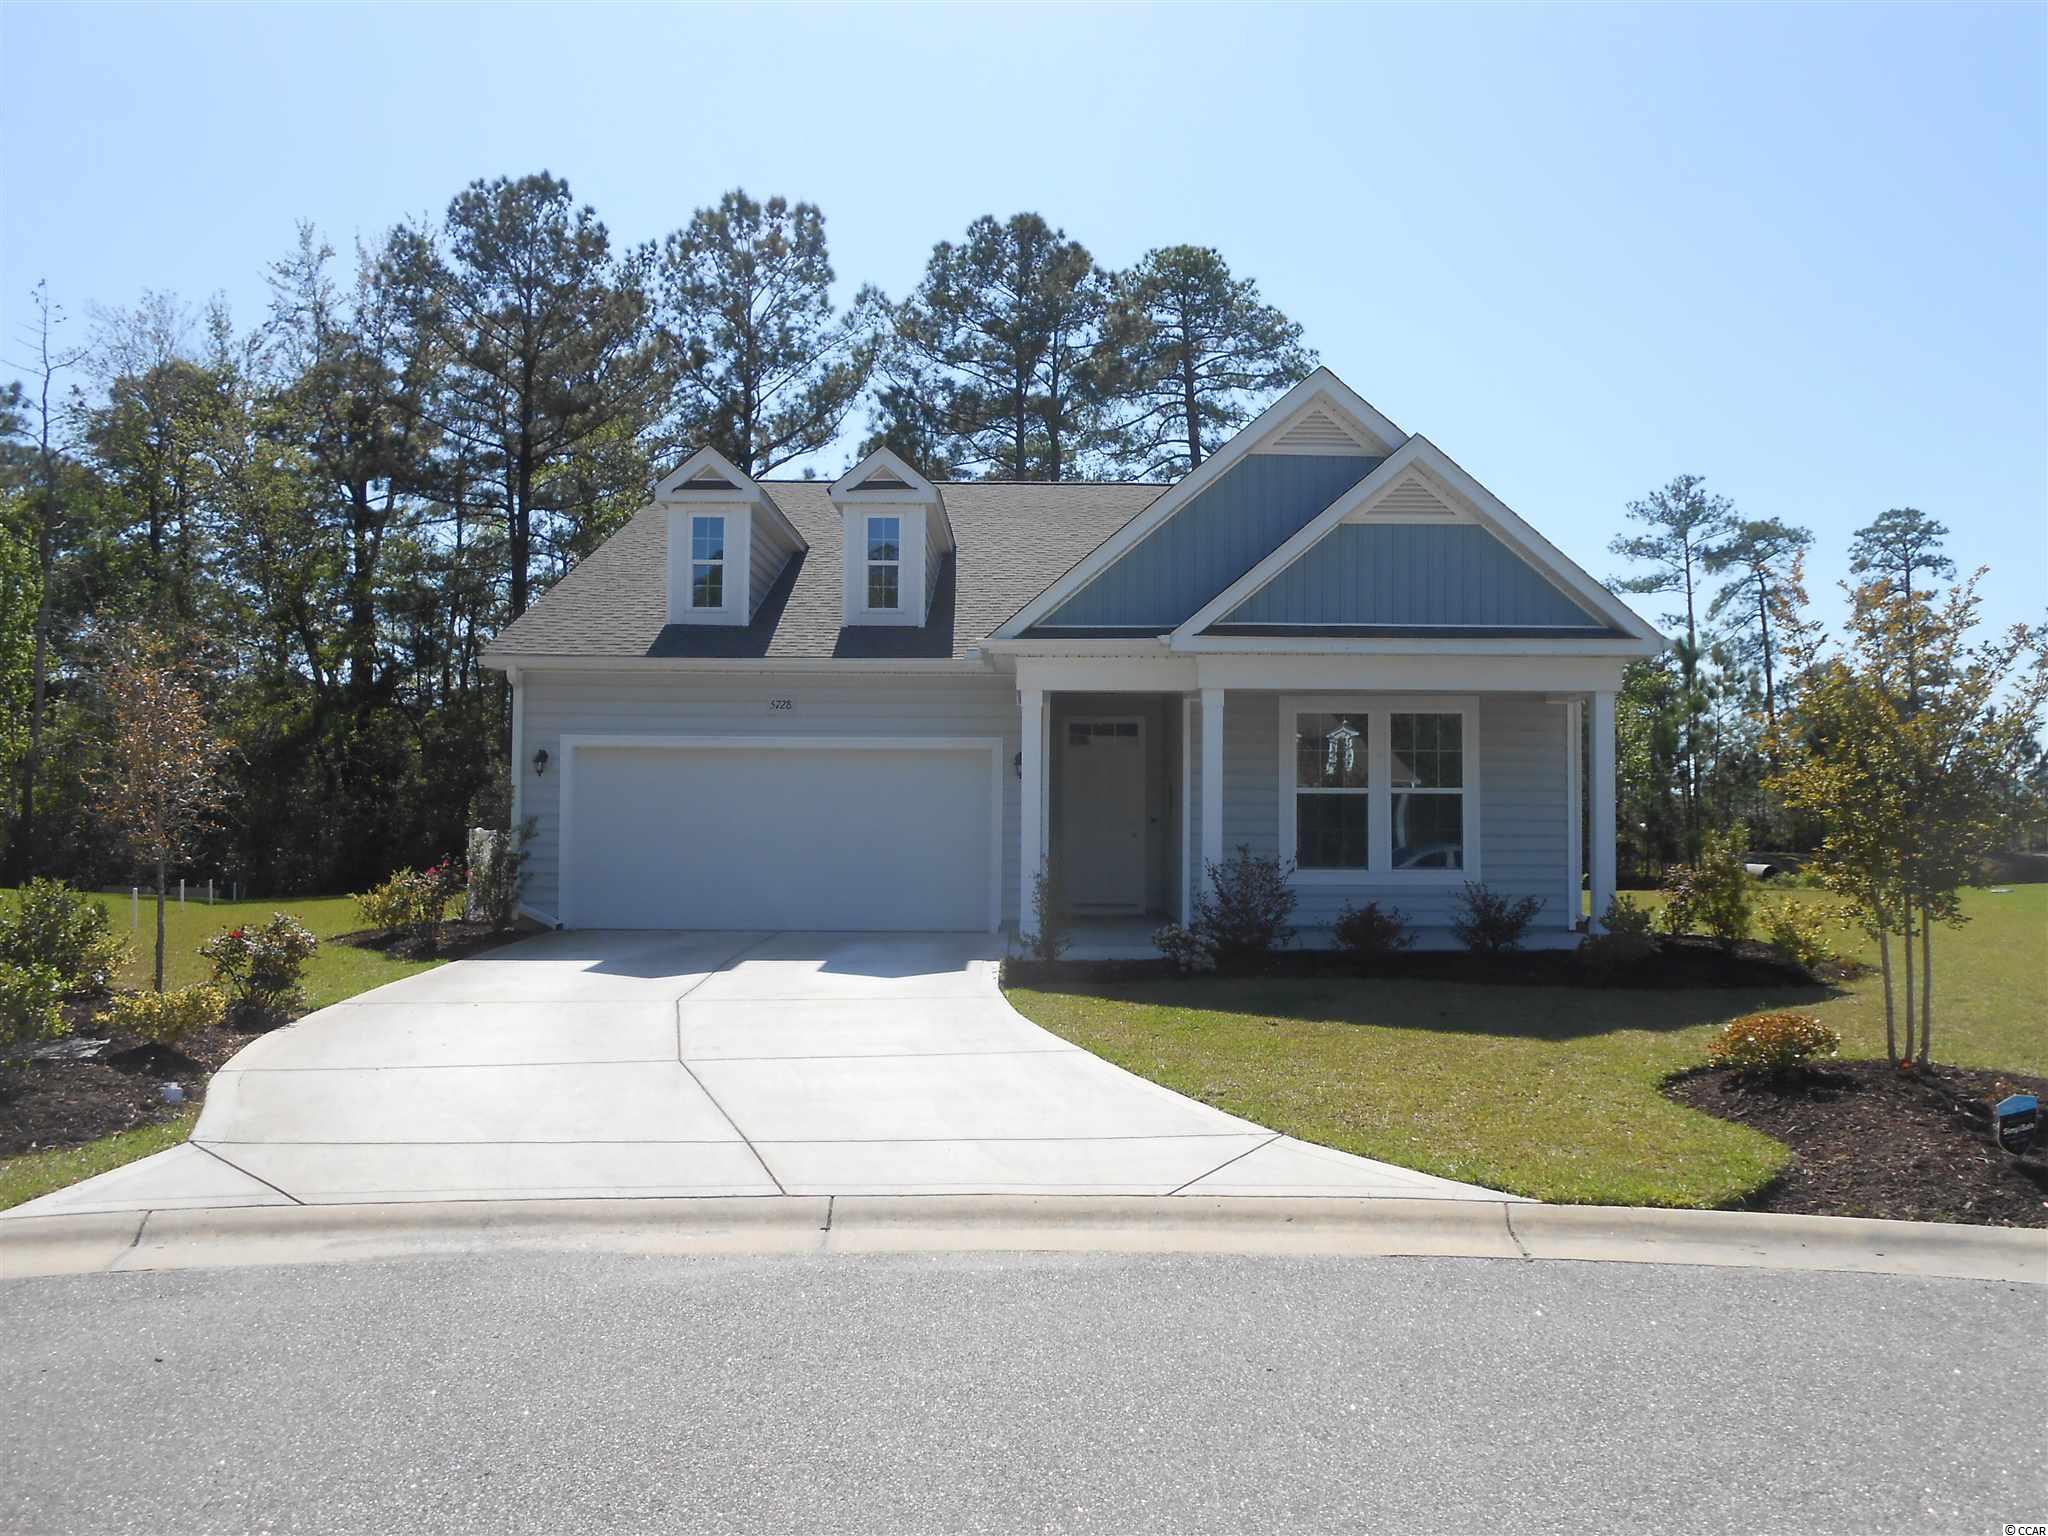 5728 Cottonseed Ct. Myrtle Beach, SC 29579